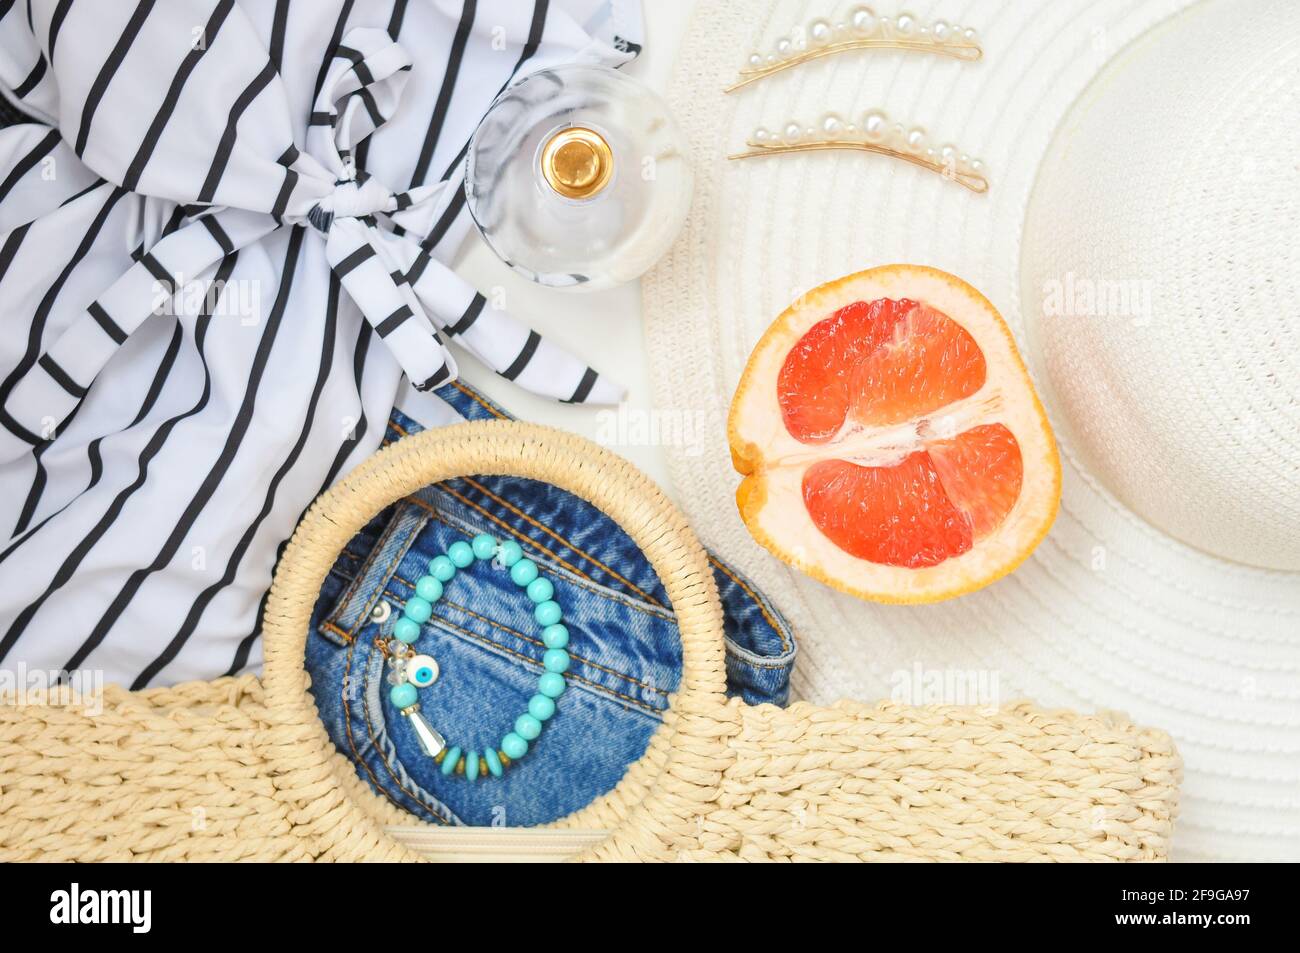 striped sweamwear turqouise bracelet and red juicy grapefruit on white background. summer clothes for woman lifestyle ,flatlay Stock Photo